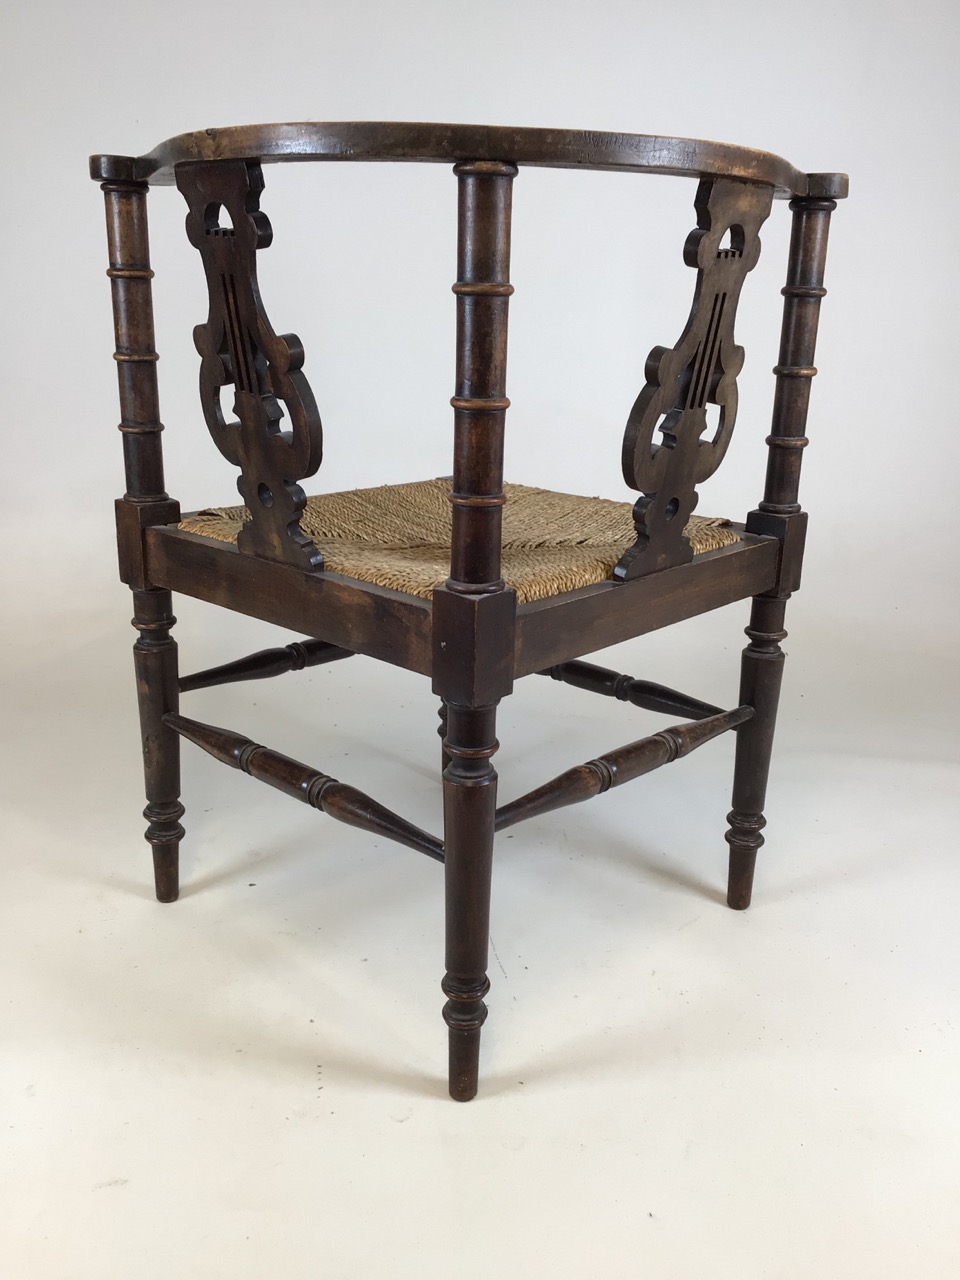 A 19th century rattan seated corner chair with curved back and lyre supports. W:61cm x D:61cm x H: - Image 3 of 6